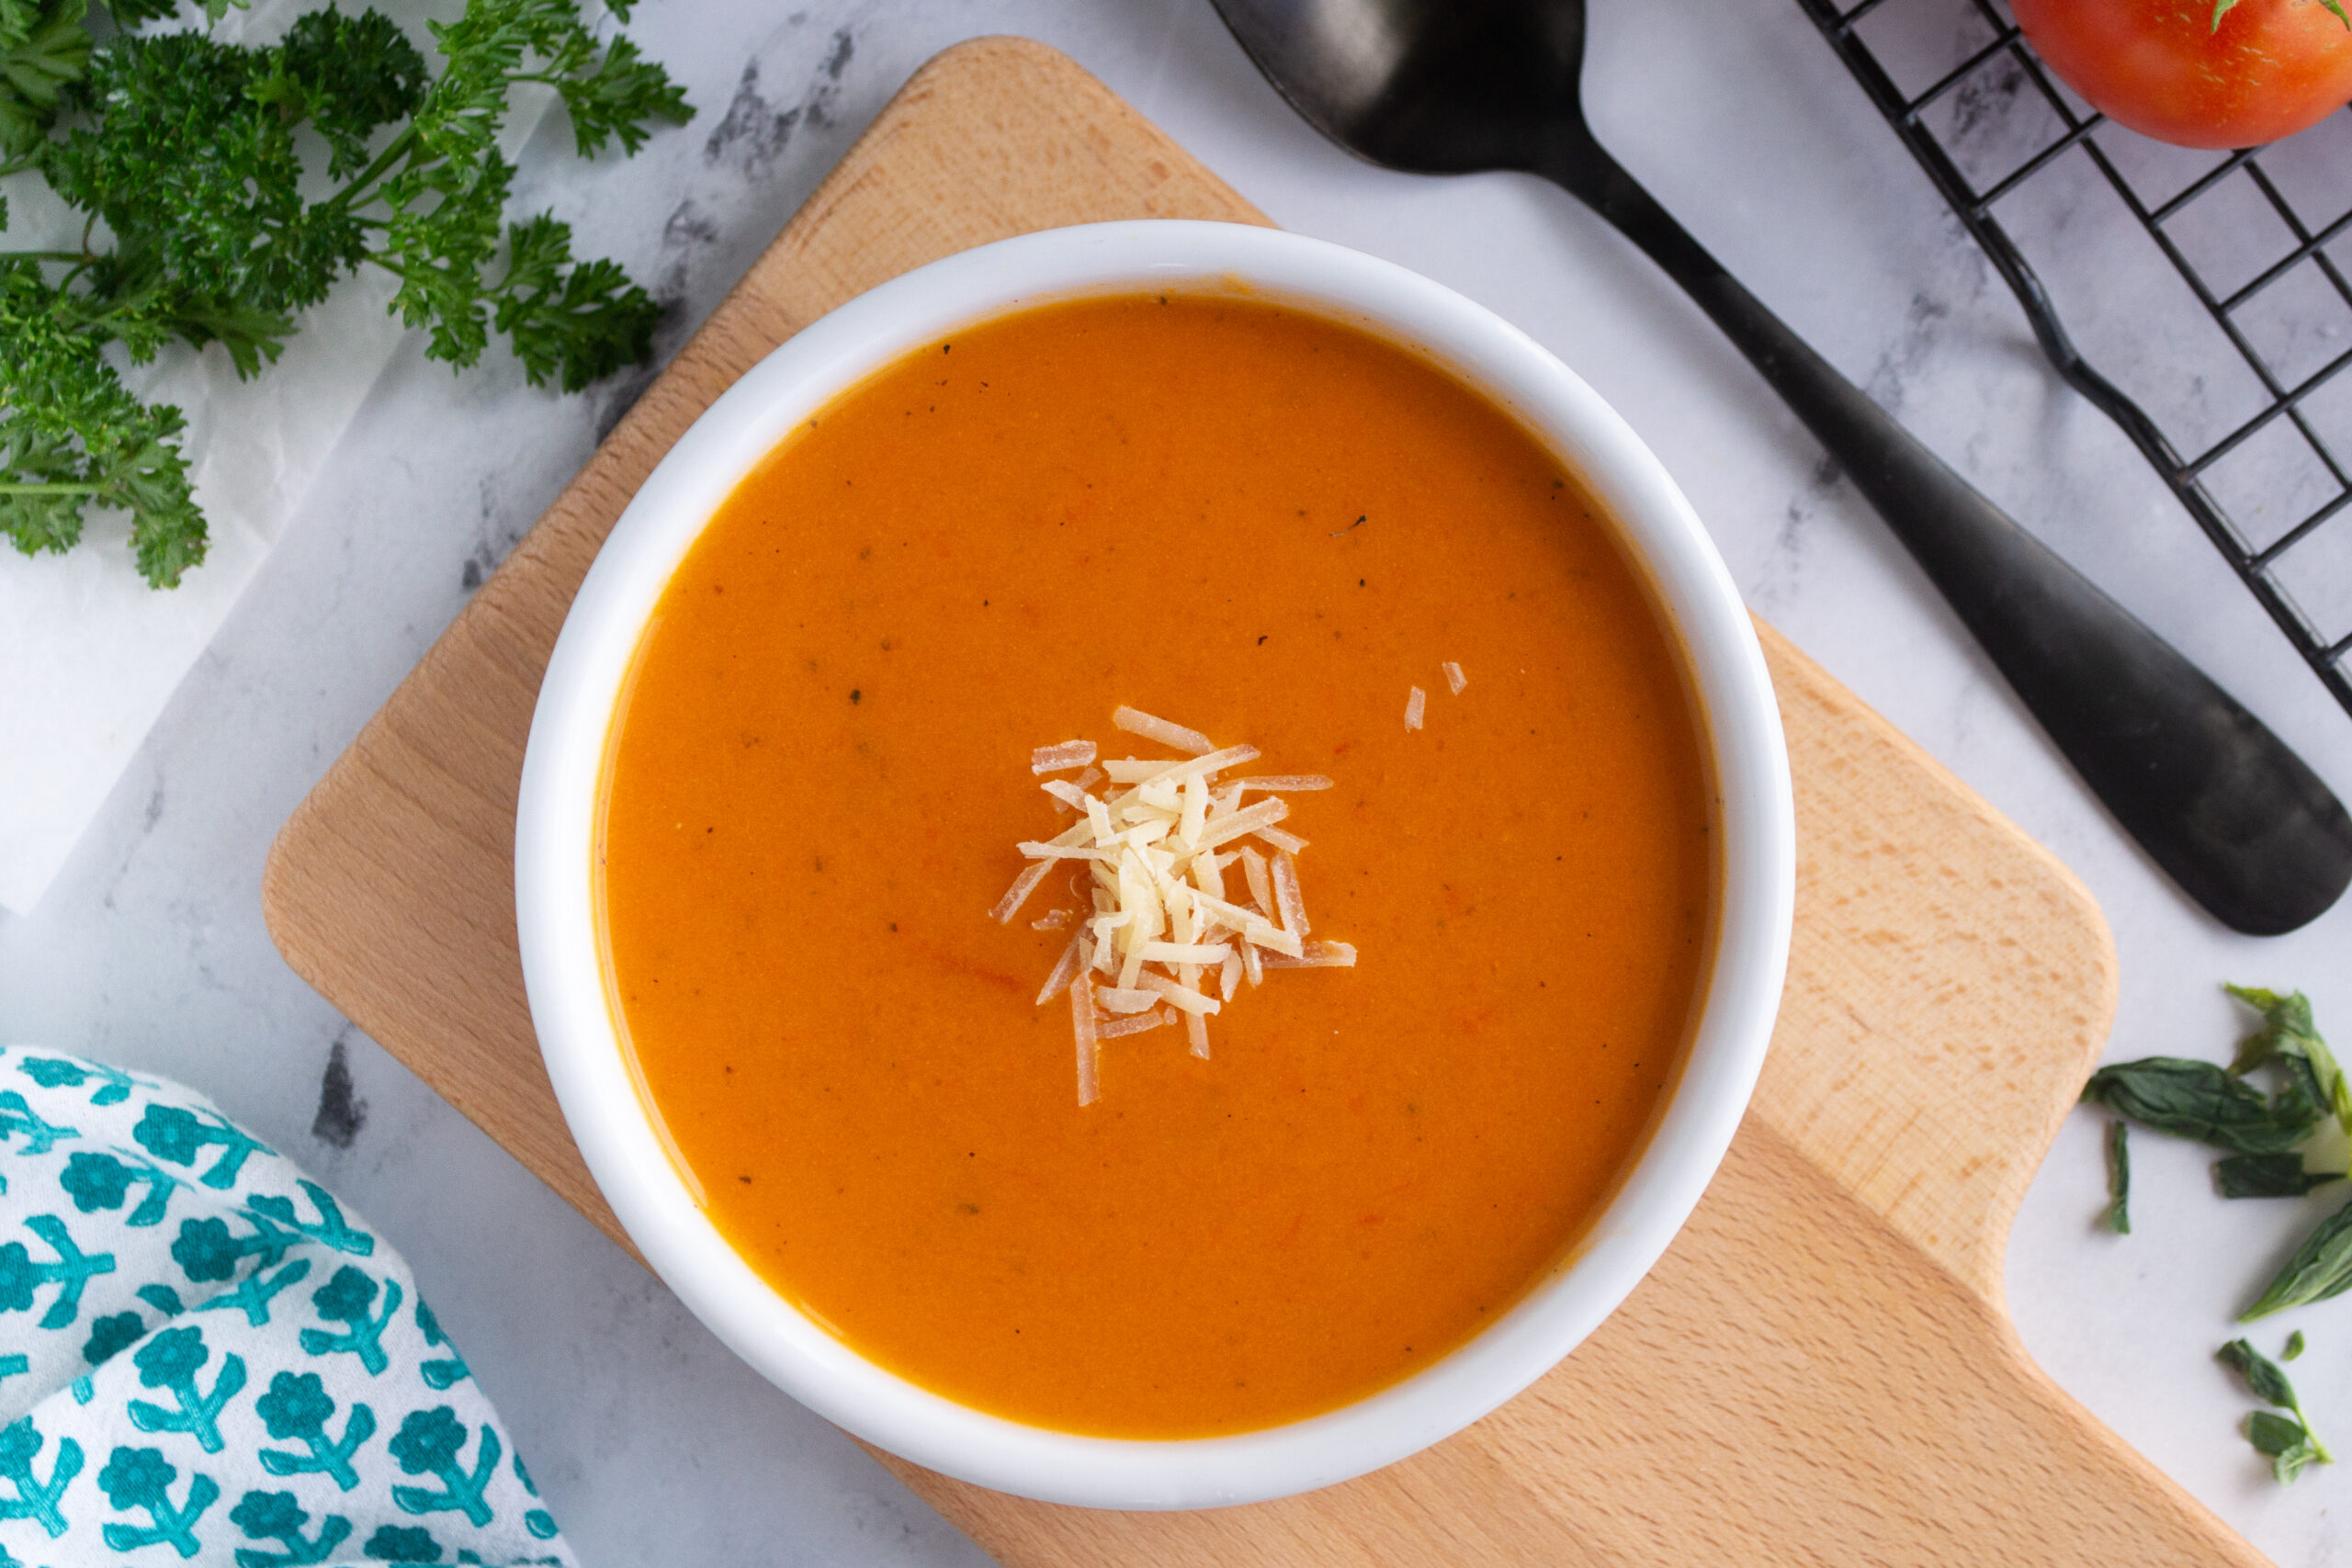 Best Ever- Homemade Tomato Soup- Instant Pot Option - Make the